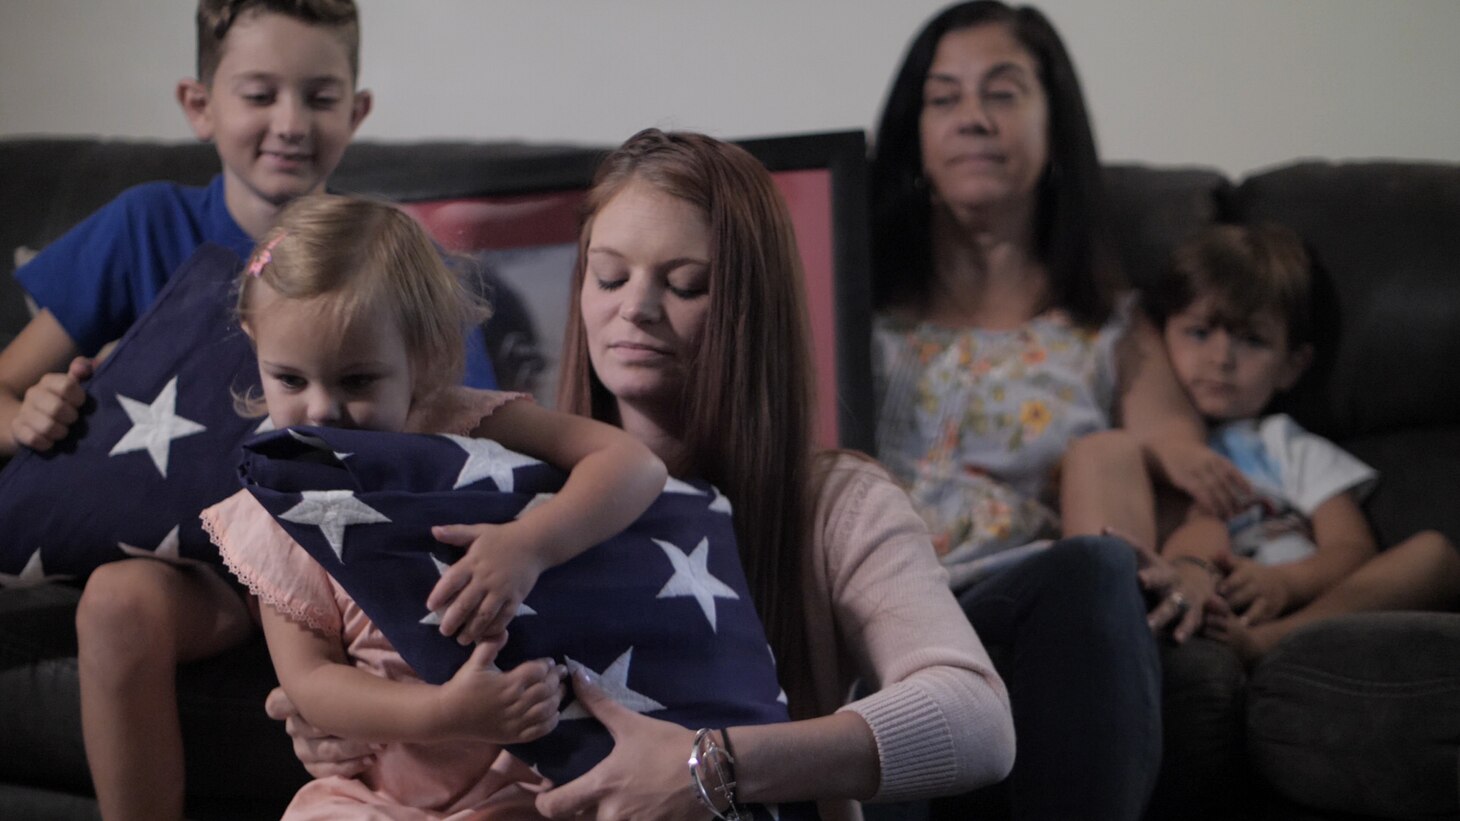 Members of the Kinkton family sits on a sofa. Morgan, wife of Kody sits on the floor with Alli in her lap who is holding a folded American flag.